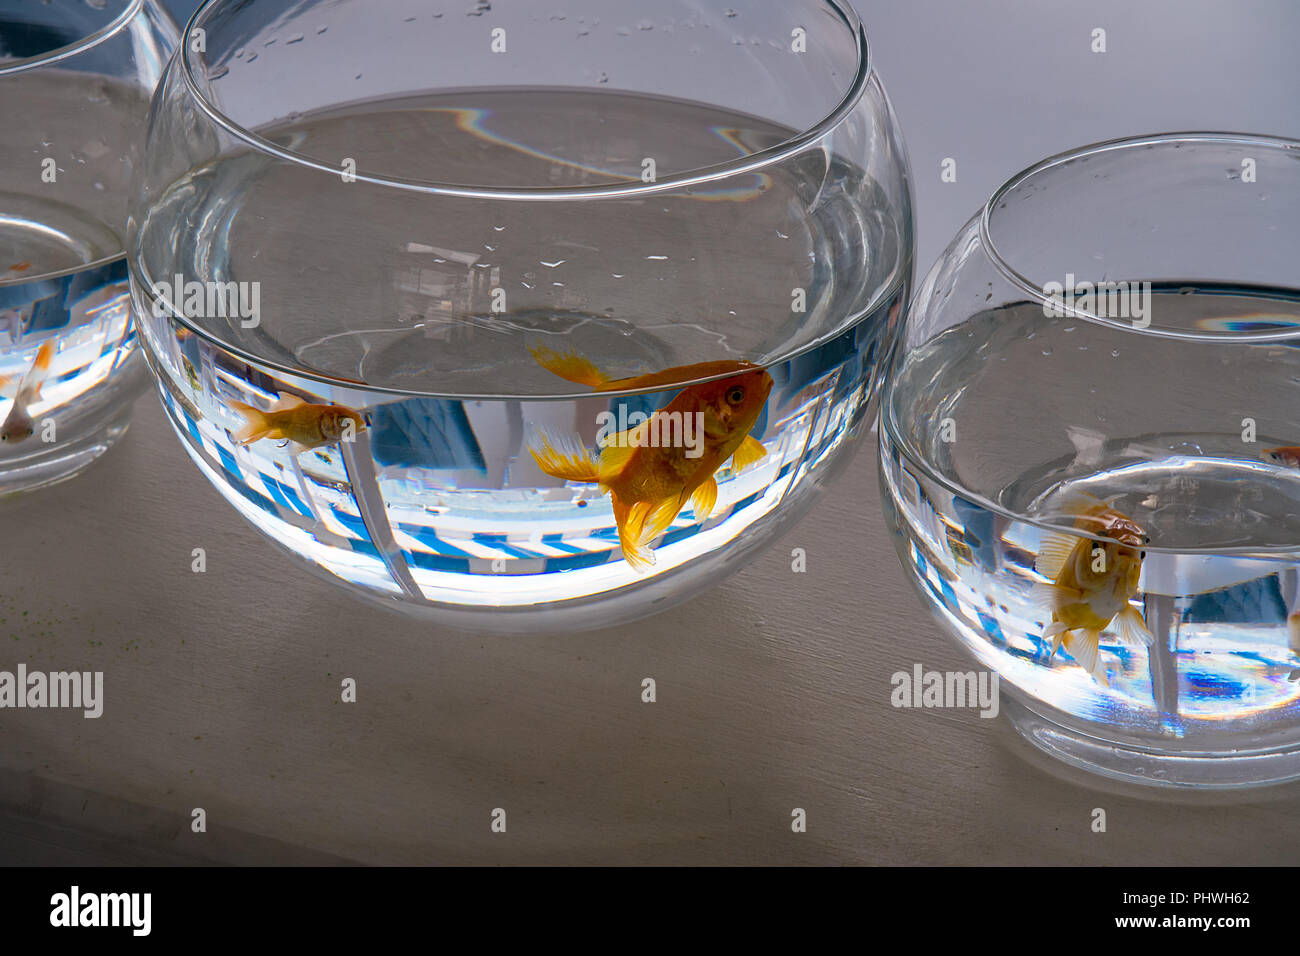 Multiple gold fish swim around their plain and simple glass bowls filled only with clear water. Stock Photo